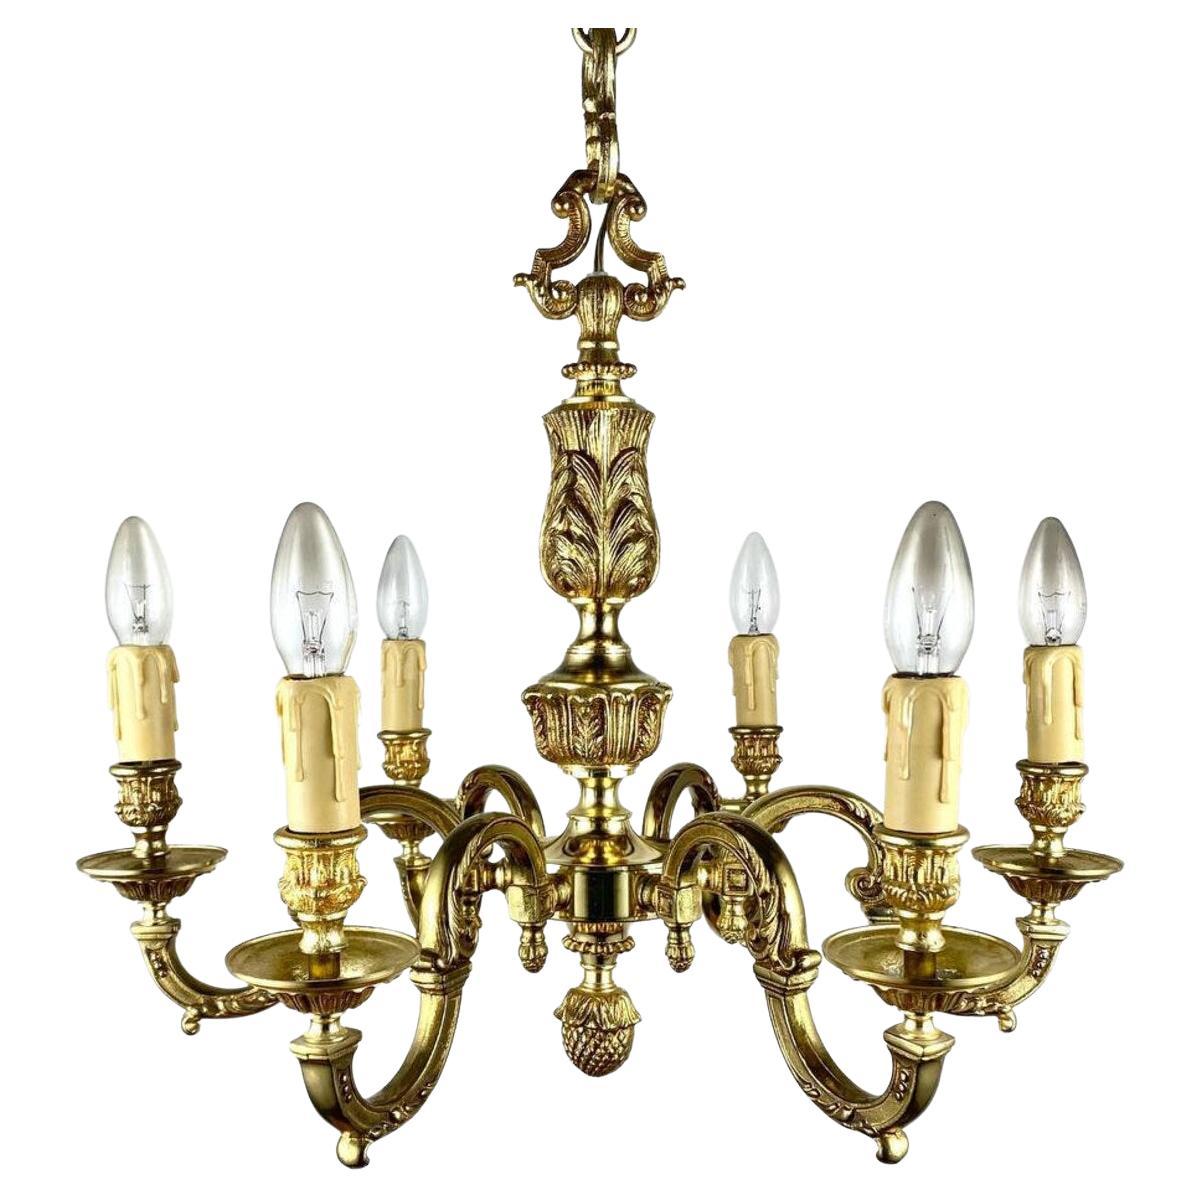 Magnificent Bronze Chandelier In Empire Style  Six Light Pendant Lighting For Sale